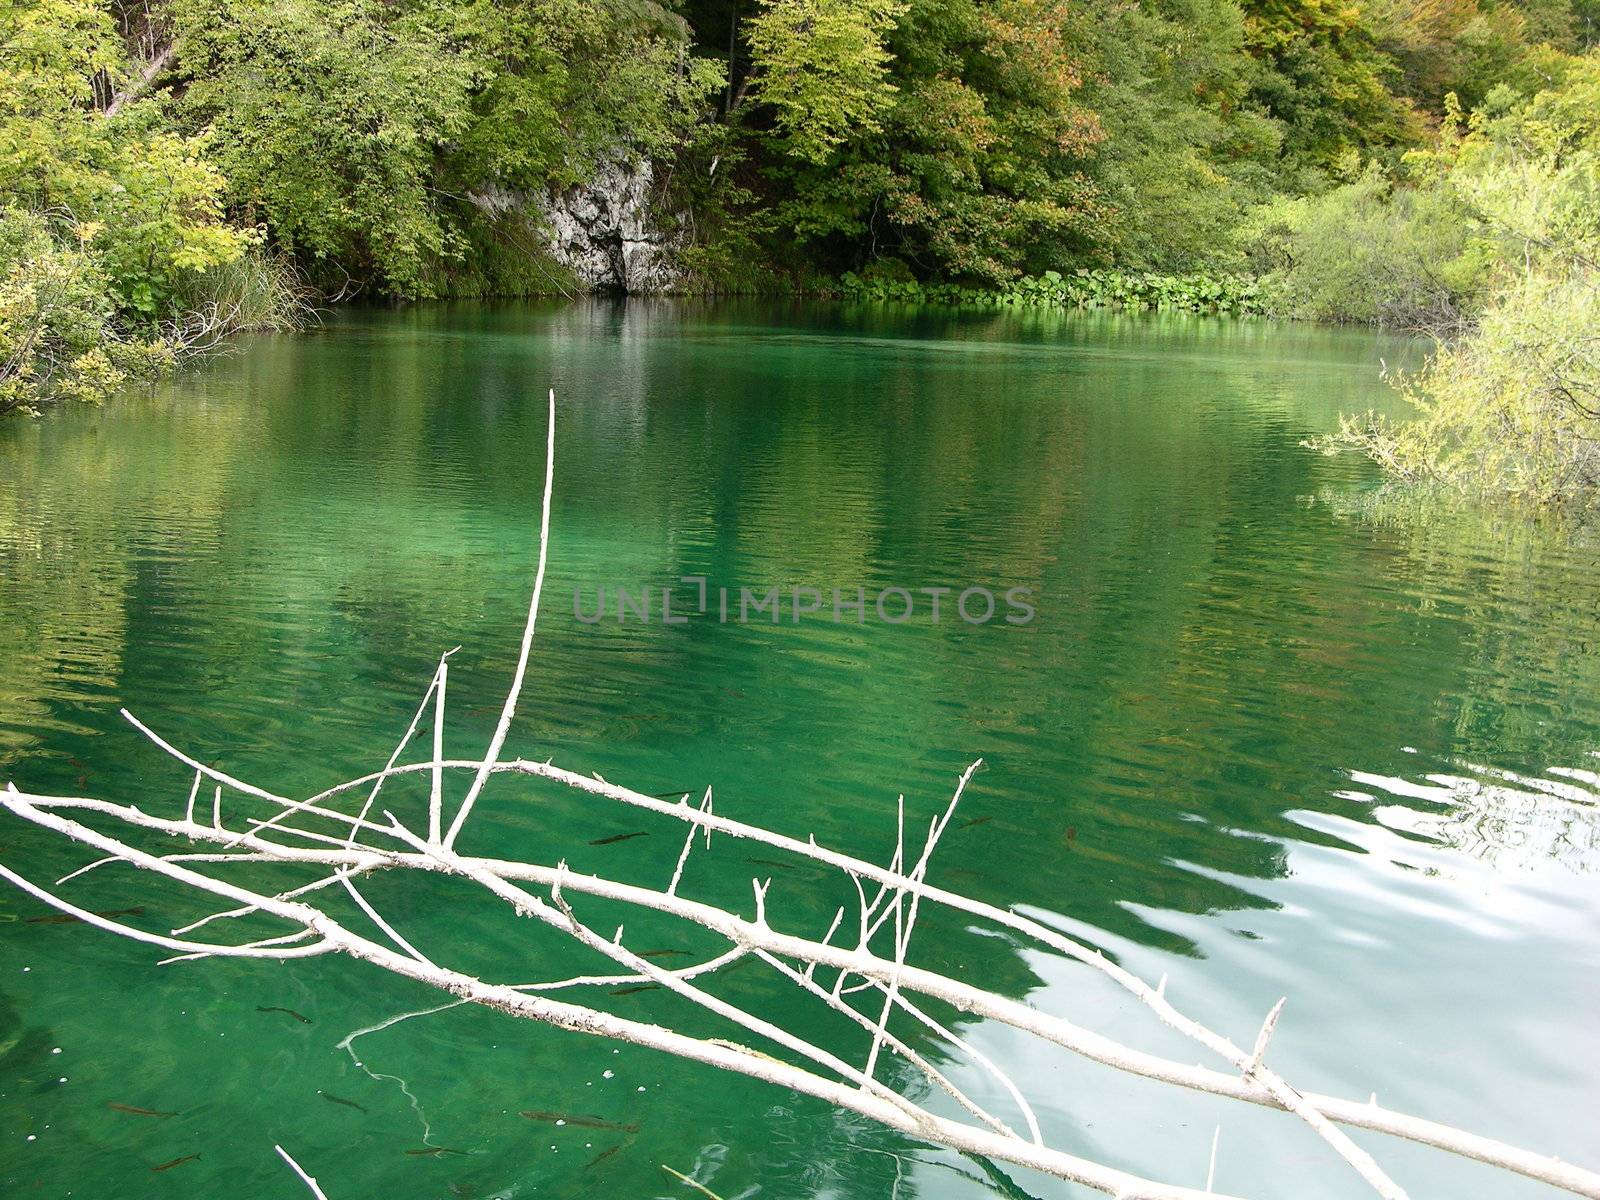 view of spring in "Plitvice lakes" park